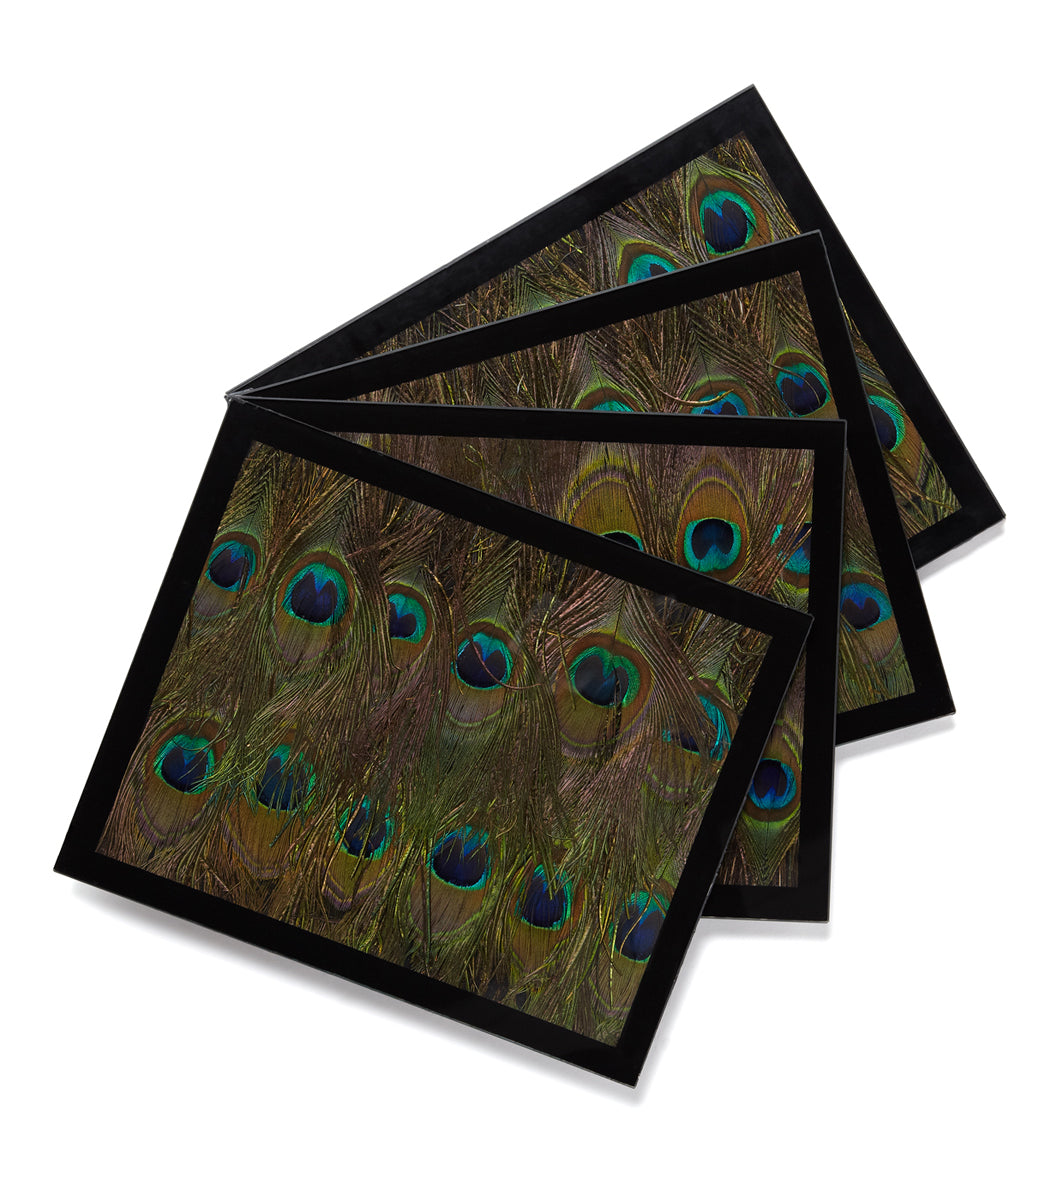 Outlet Item: Square Peacock Feather Placemats by Wingfield Digby